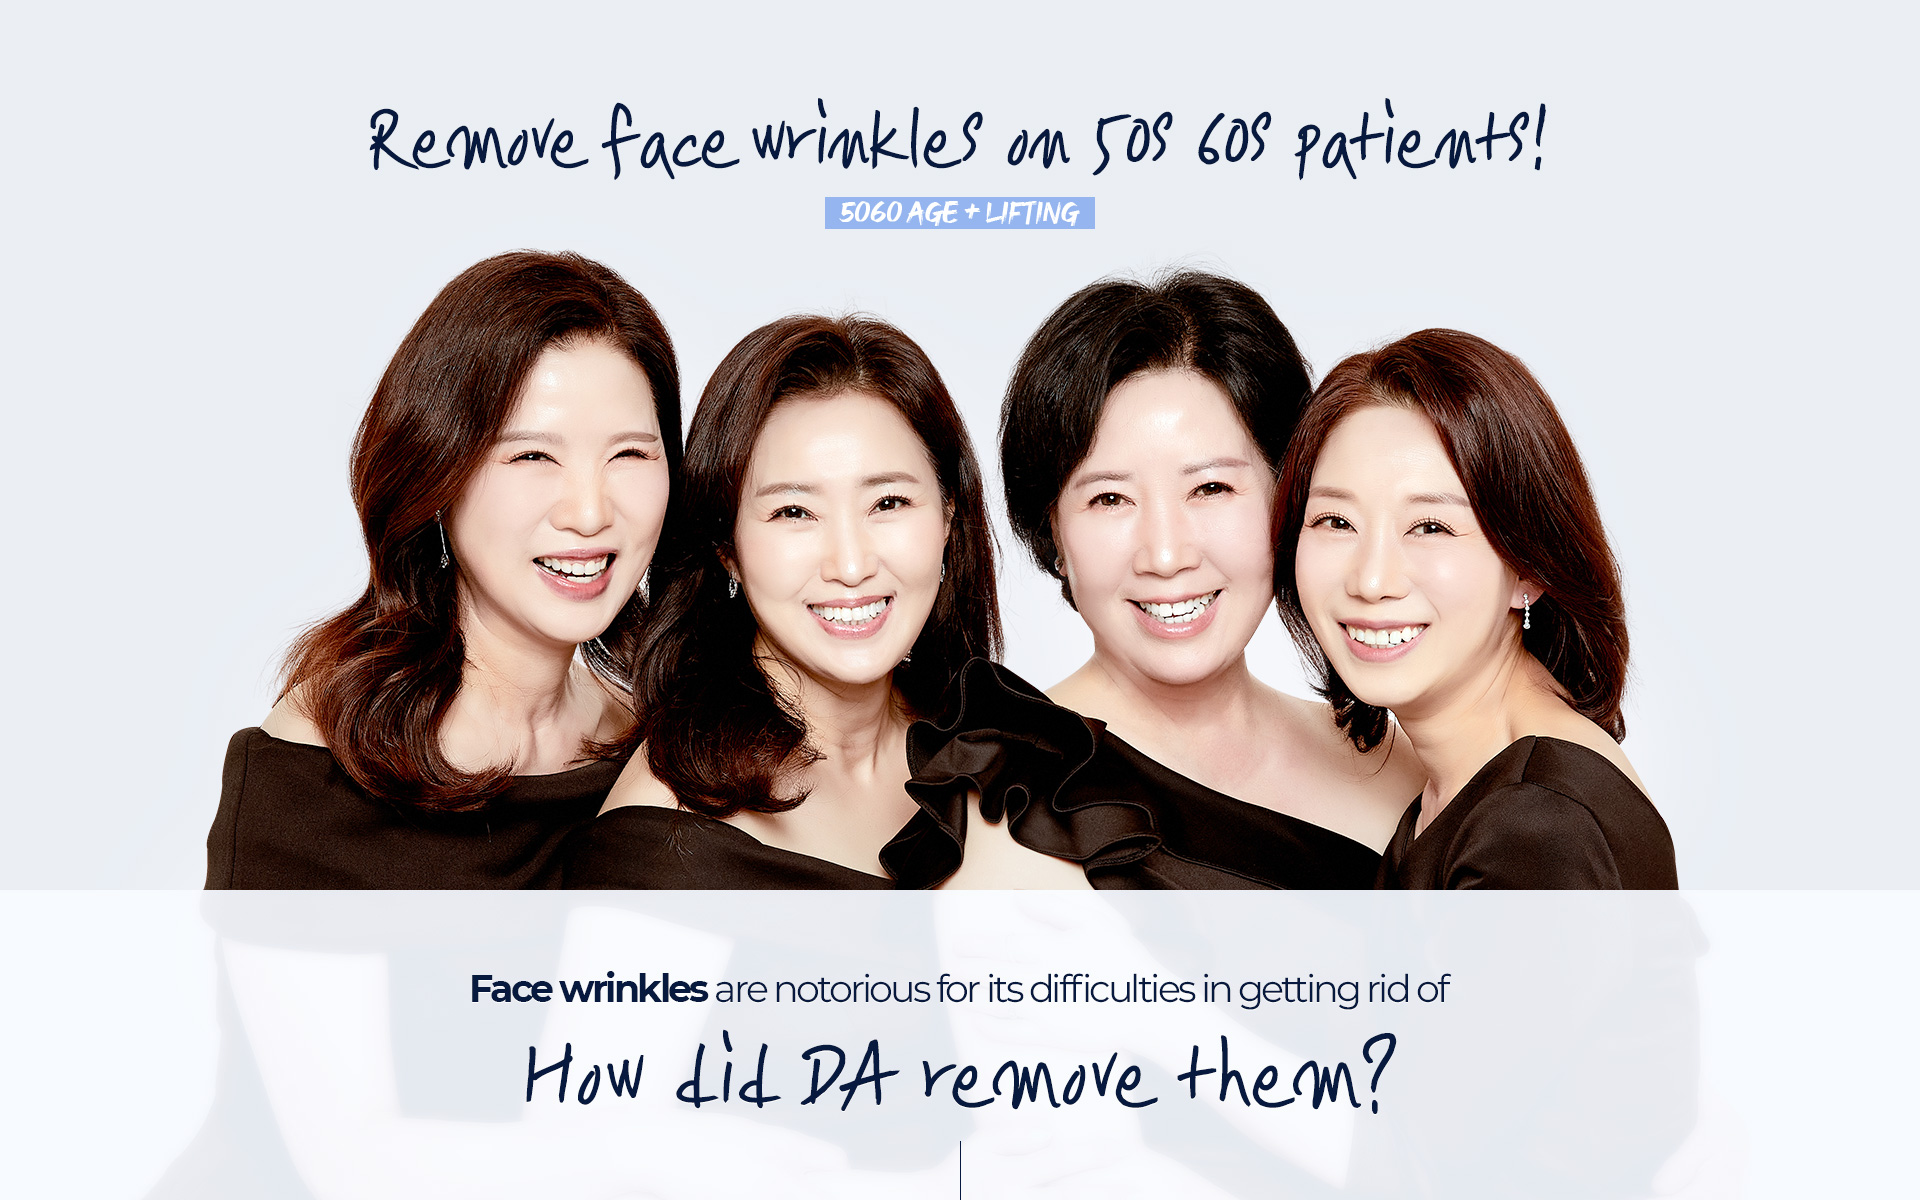 Remove face wrinkles on 50s 60s patients!